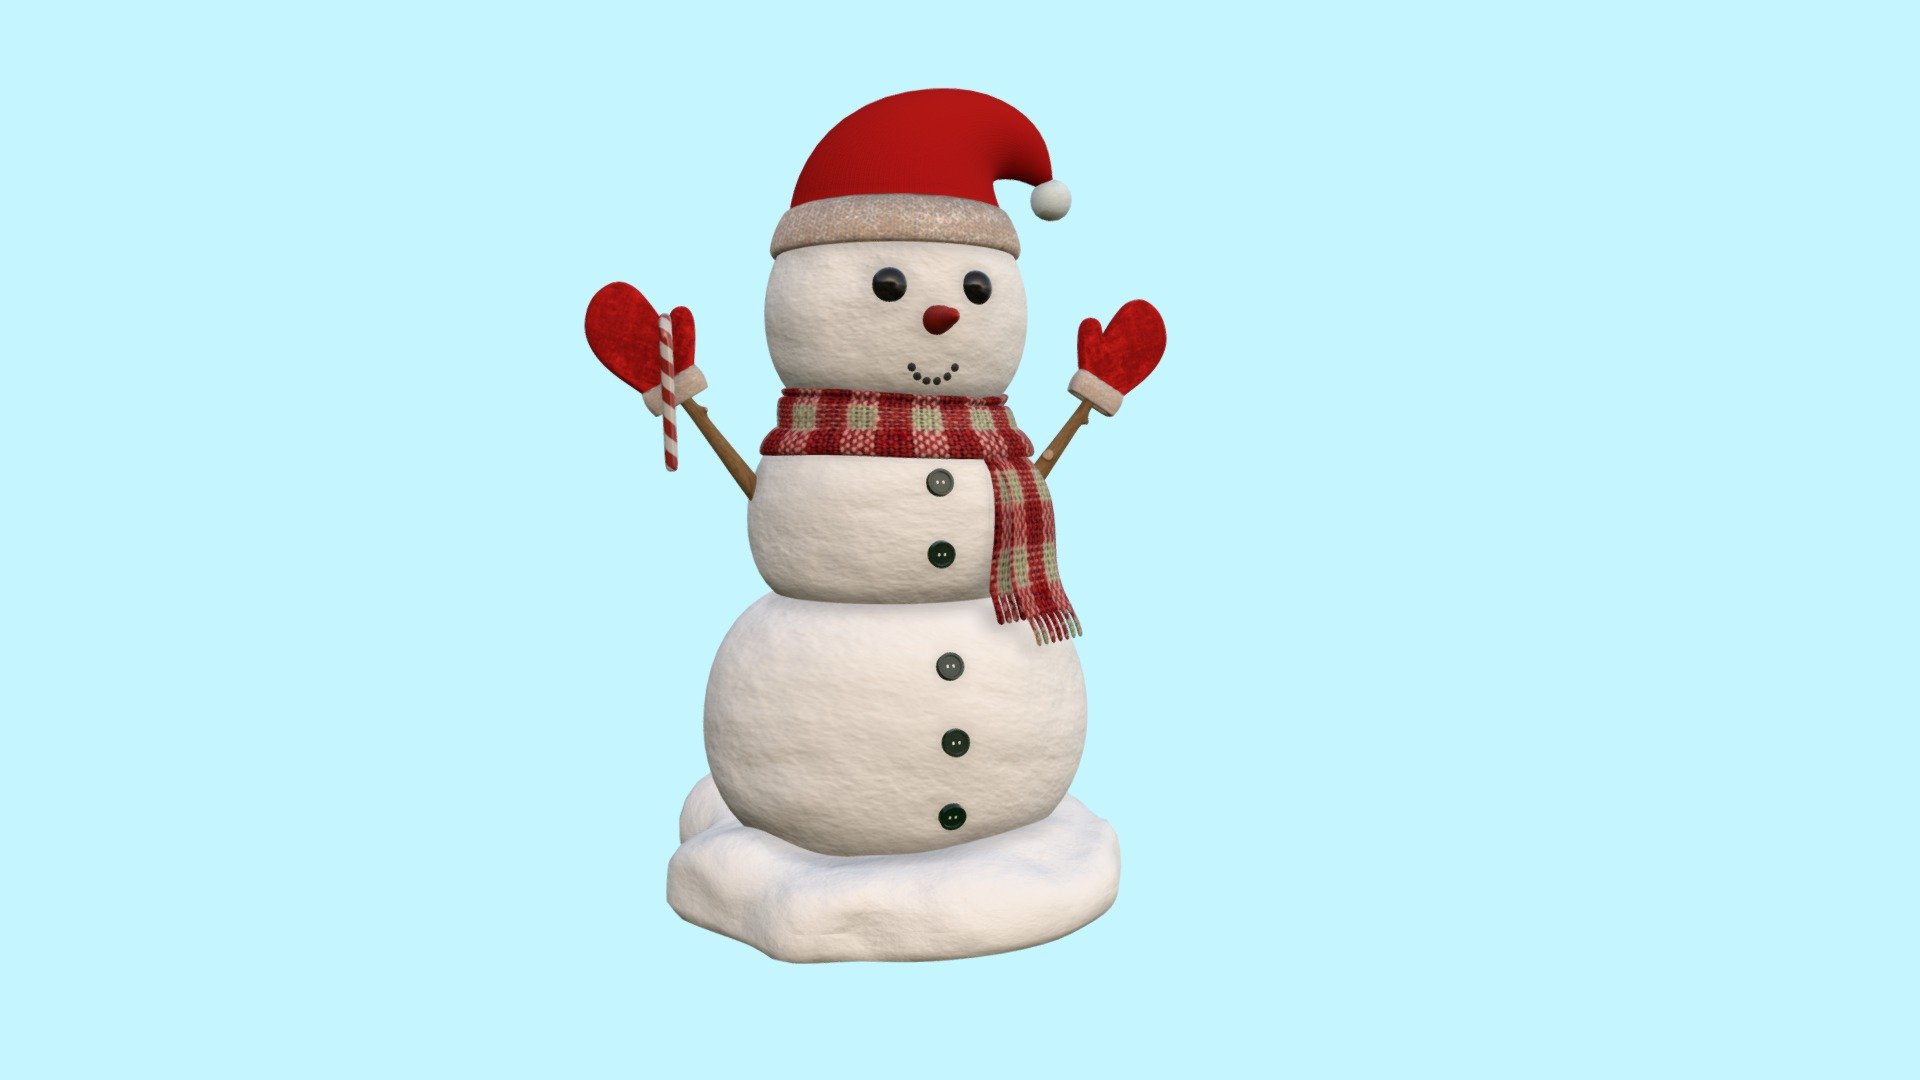 Snowman
this work contains 15 objects, the scene is in mid-poly
Model designed for these magical dates 3d model